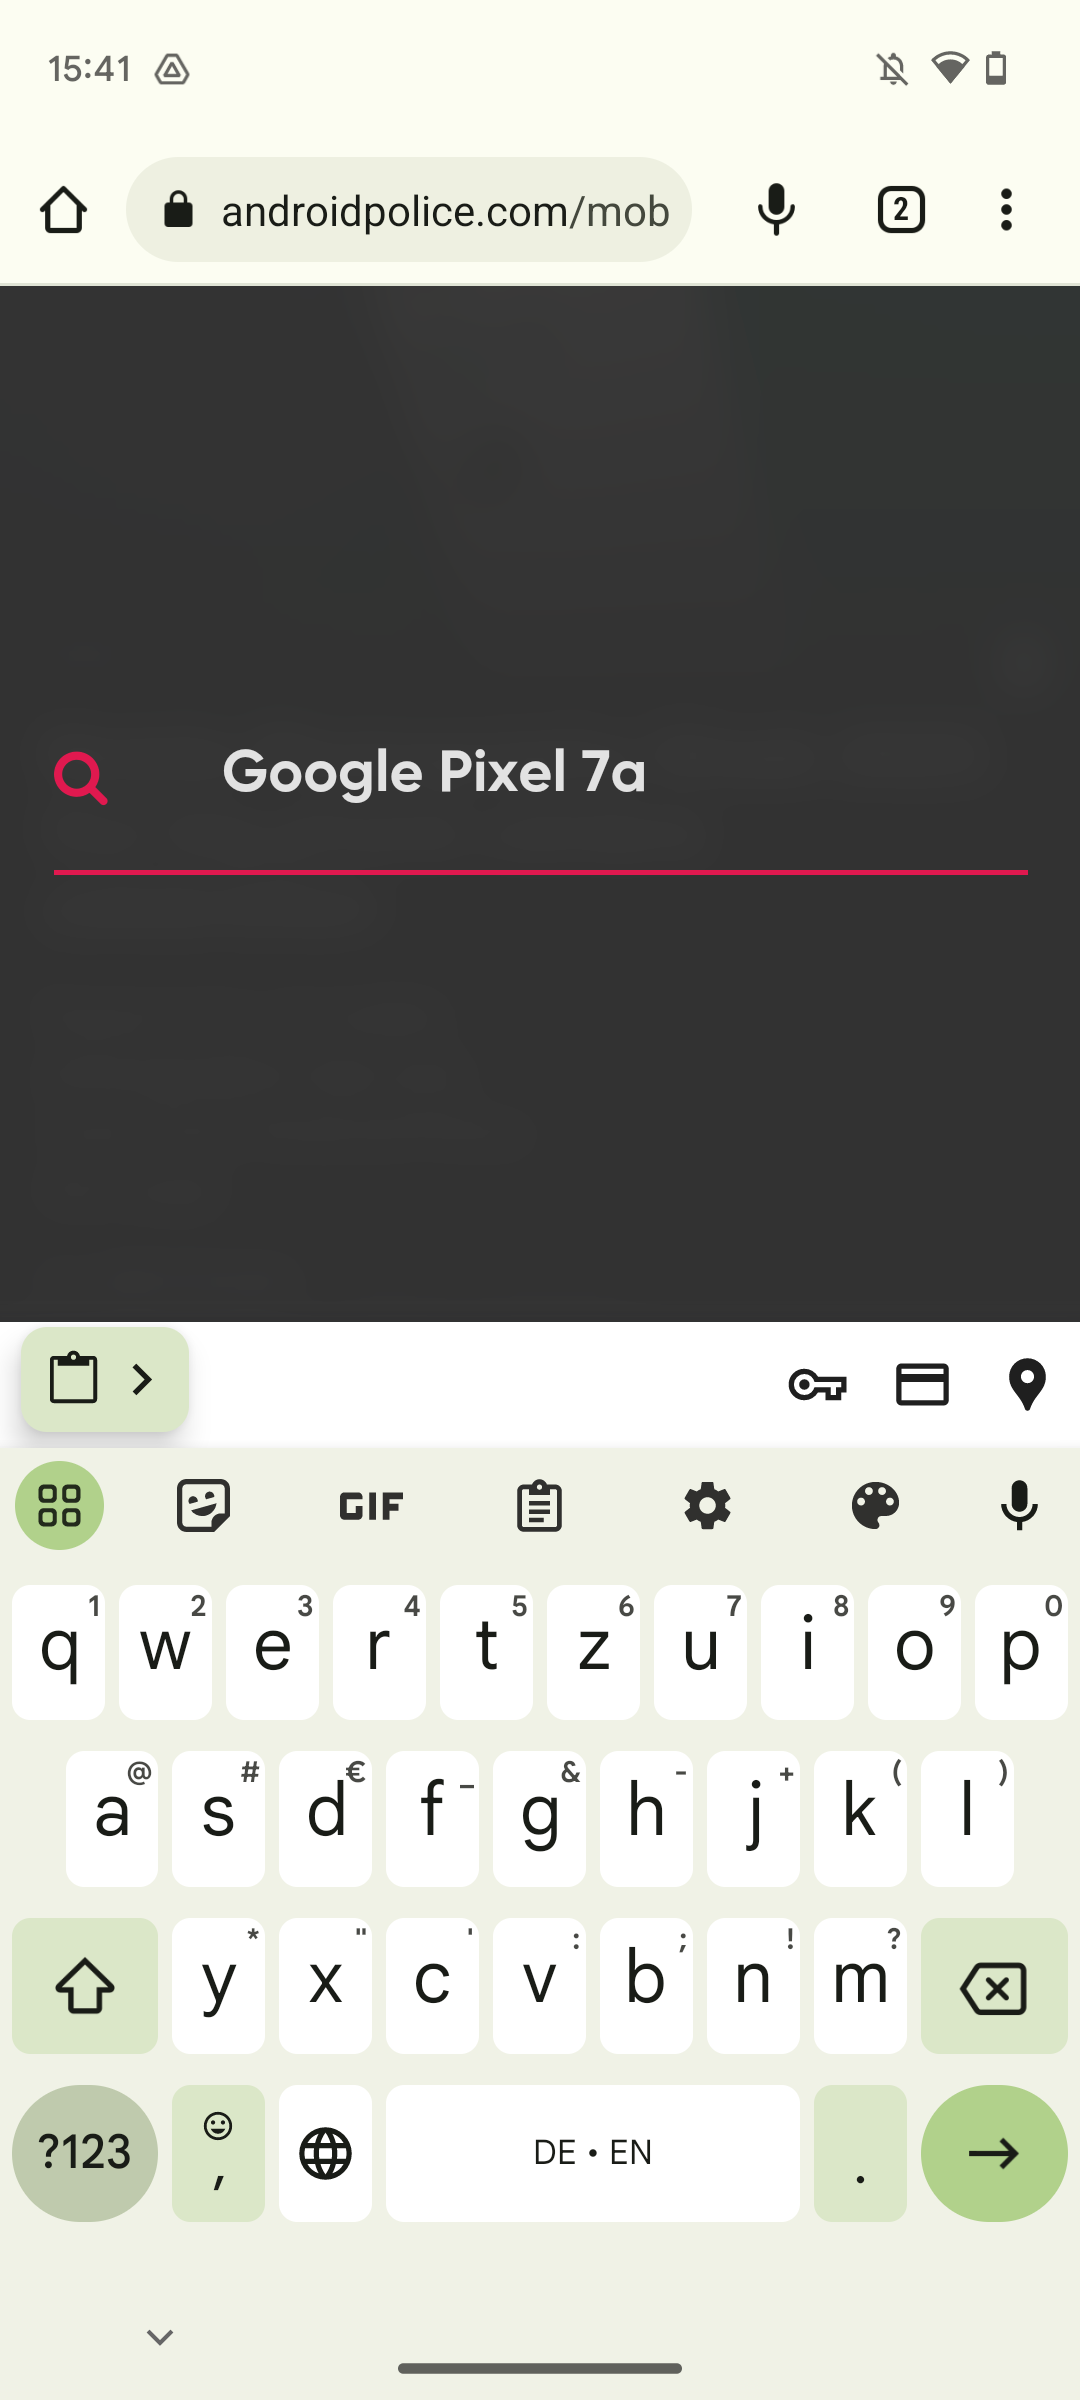 Screenshot of Android 14 Beta 2's new minimized clipboard overlay, showing up at the top left of the on-screen keyboard